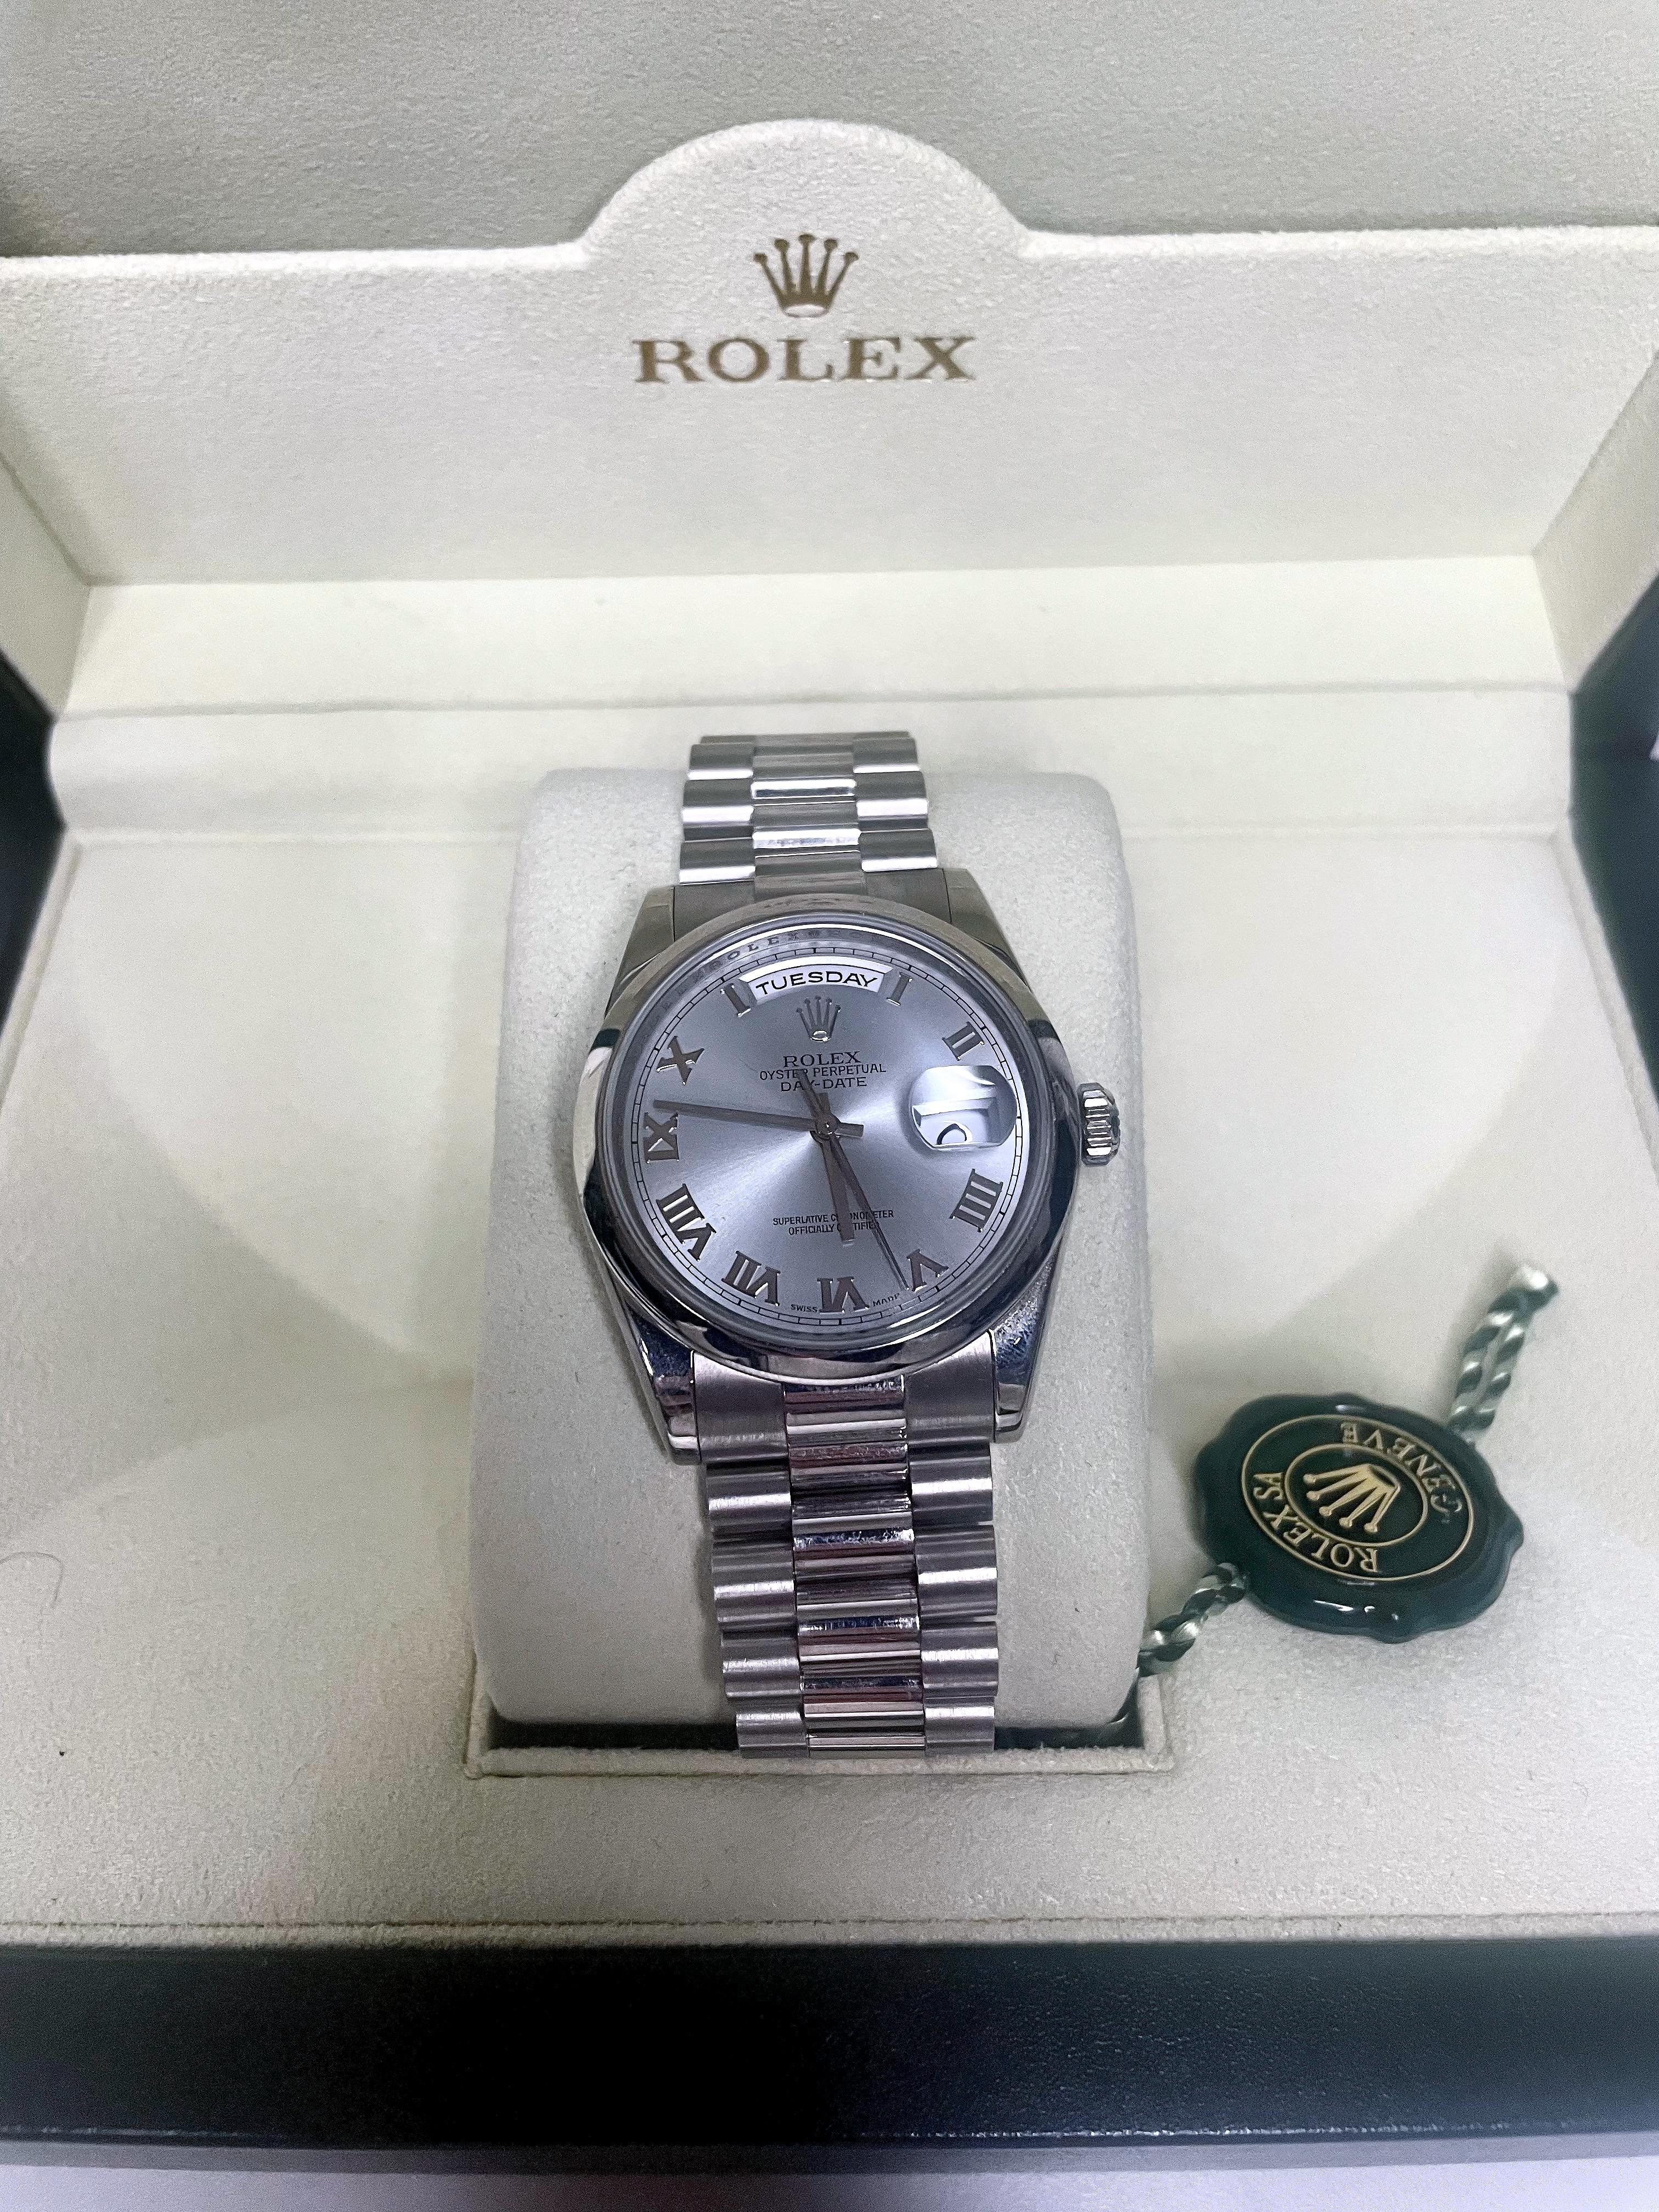 ROLEX MENS SOLID PLATINUM AND ICE BLUE DAY-DATE PRESIDENT WRISTWATCH

ITEM DESCRIPTION: 
This extremely rare Rolex President is guaranteed to make a statement.  This is the iconic Rolex President Day-Date Model In Platinum. This model is considered